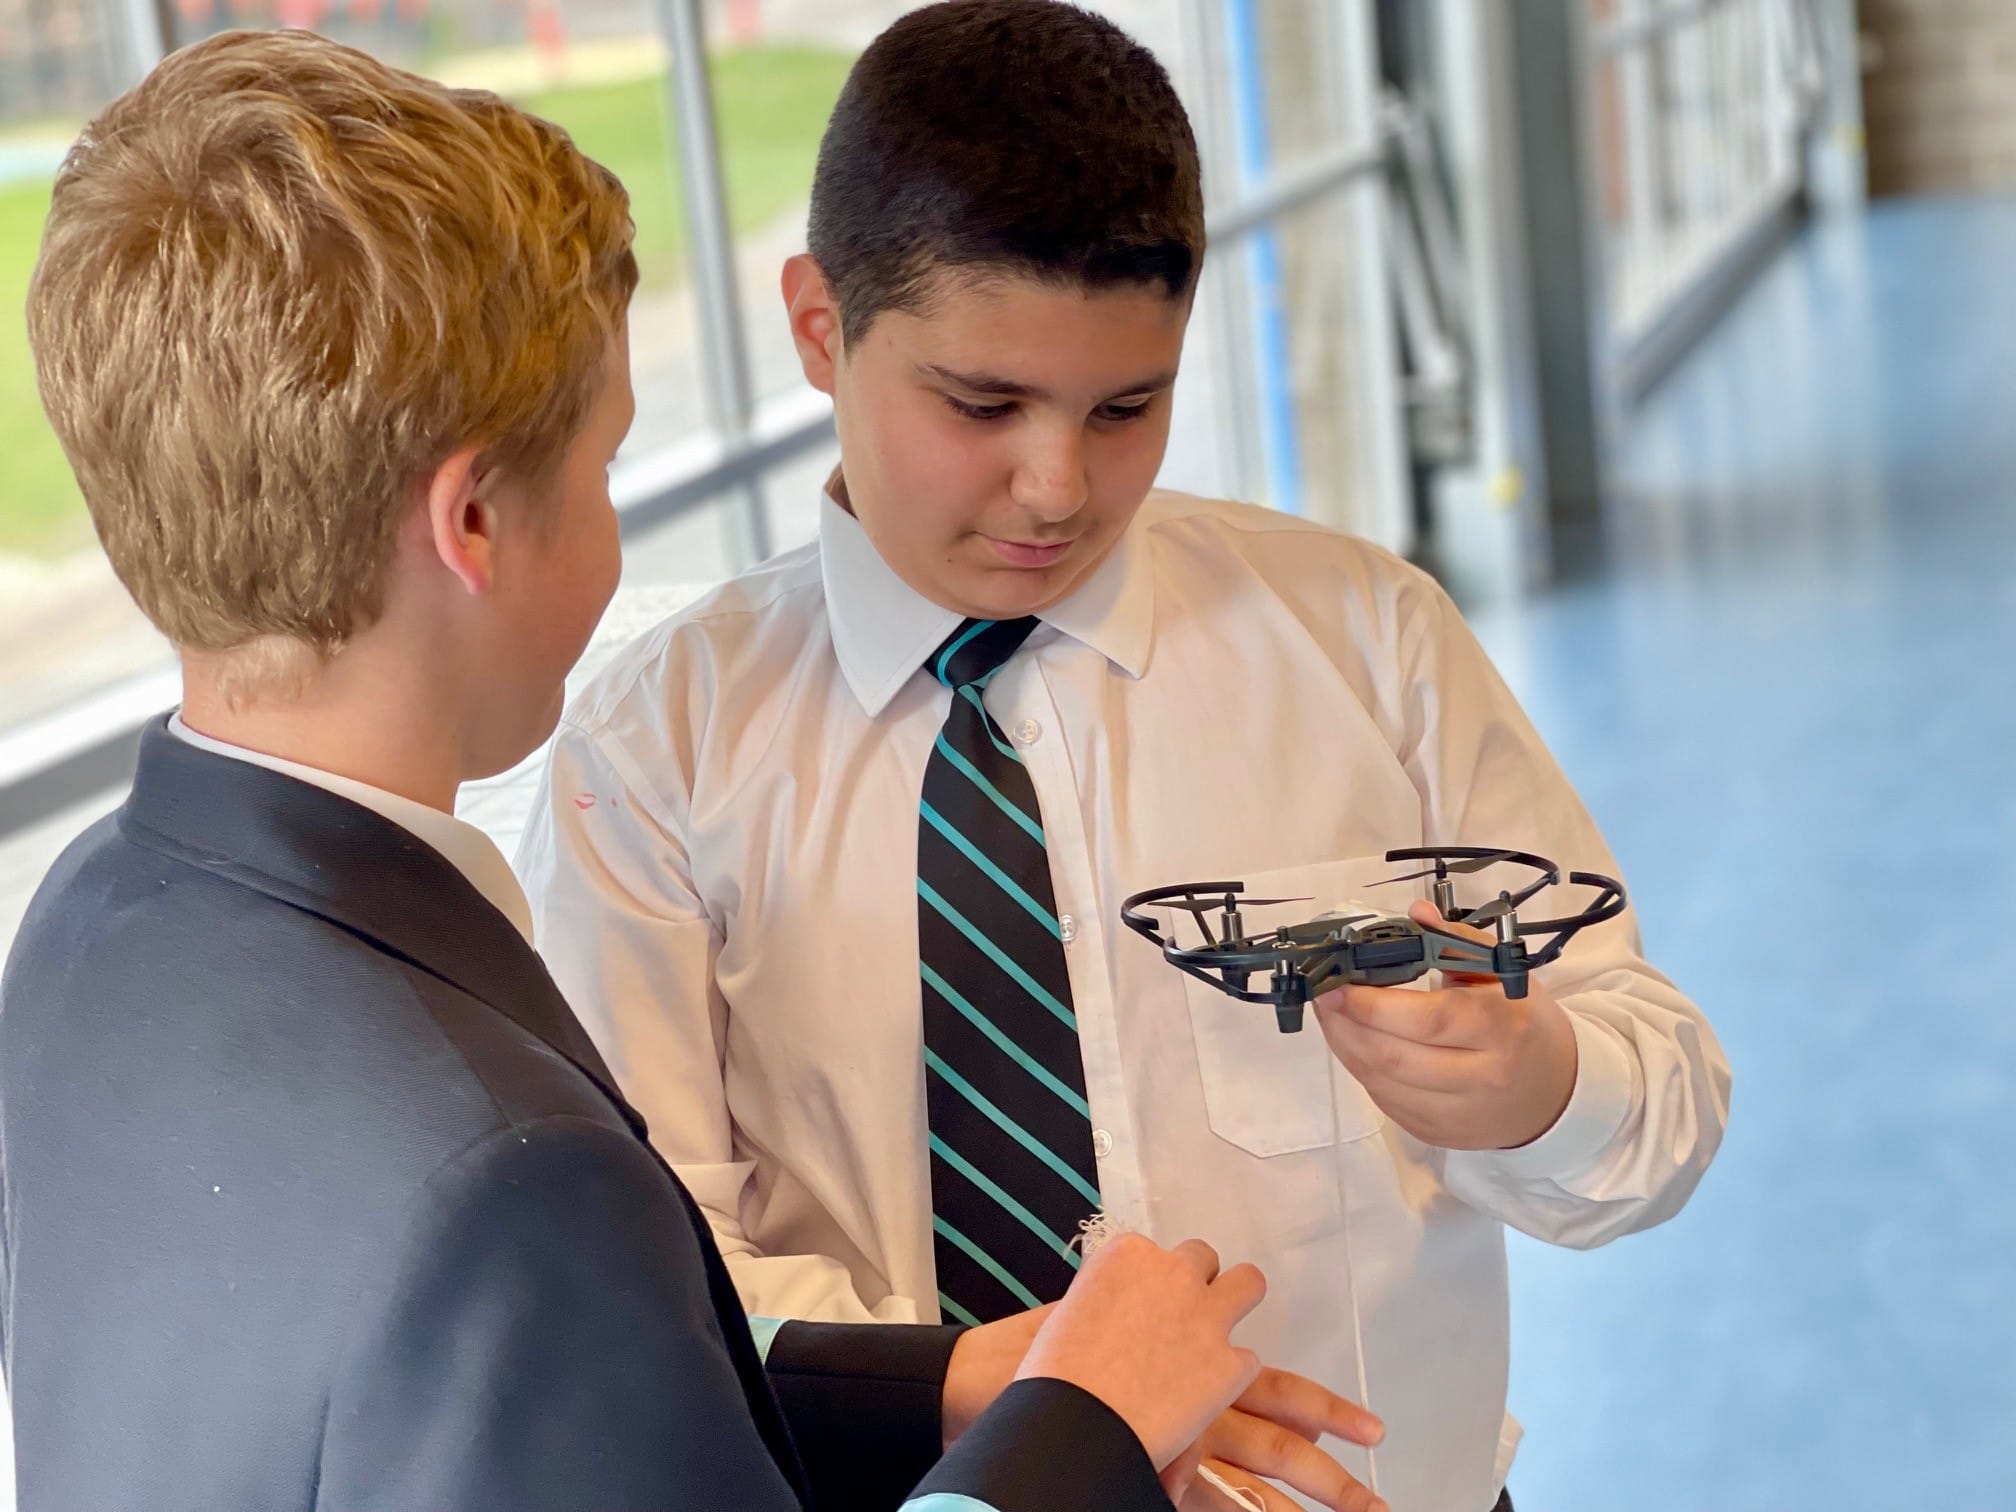 Drone Academy students reaching new heights